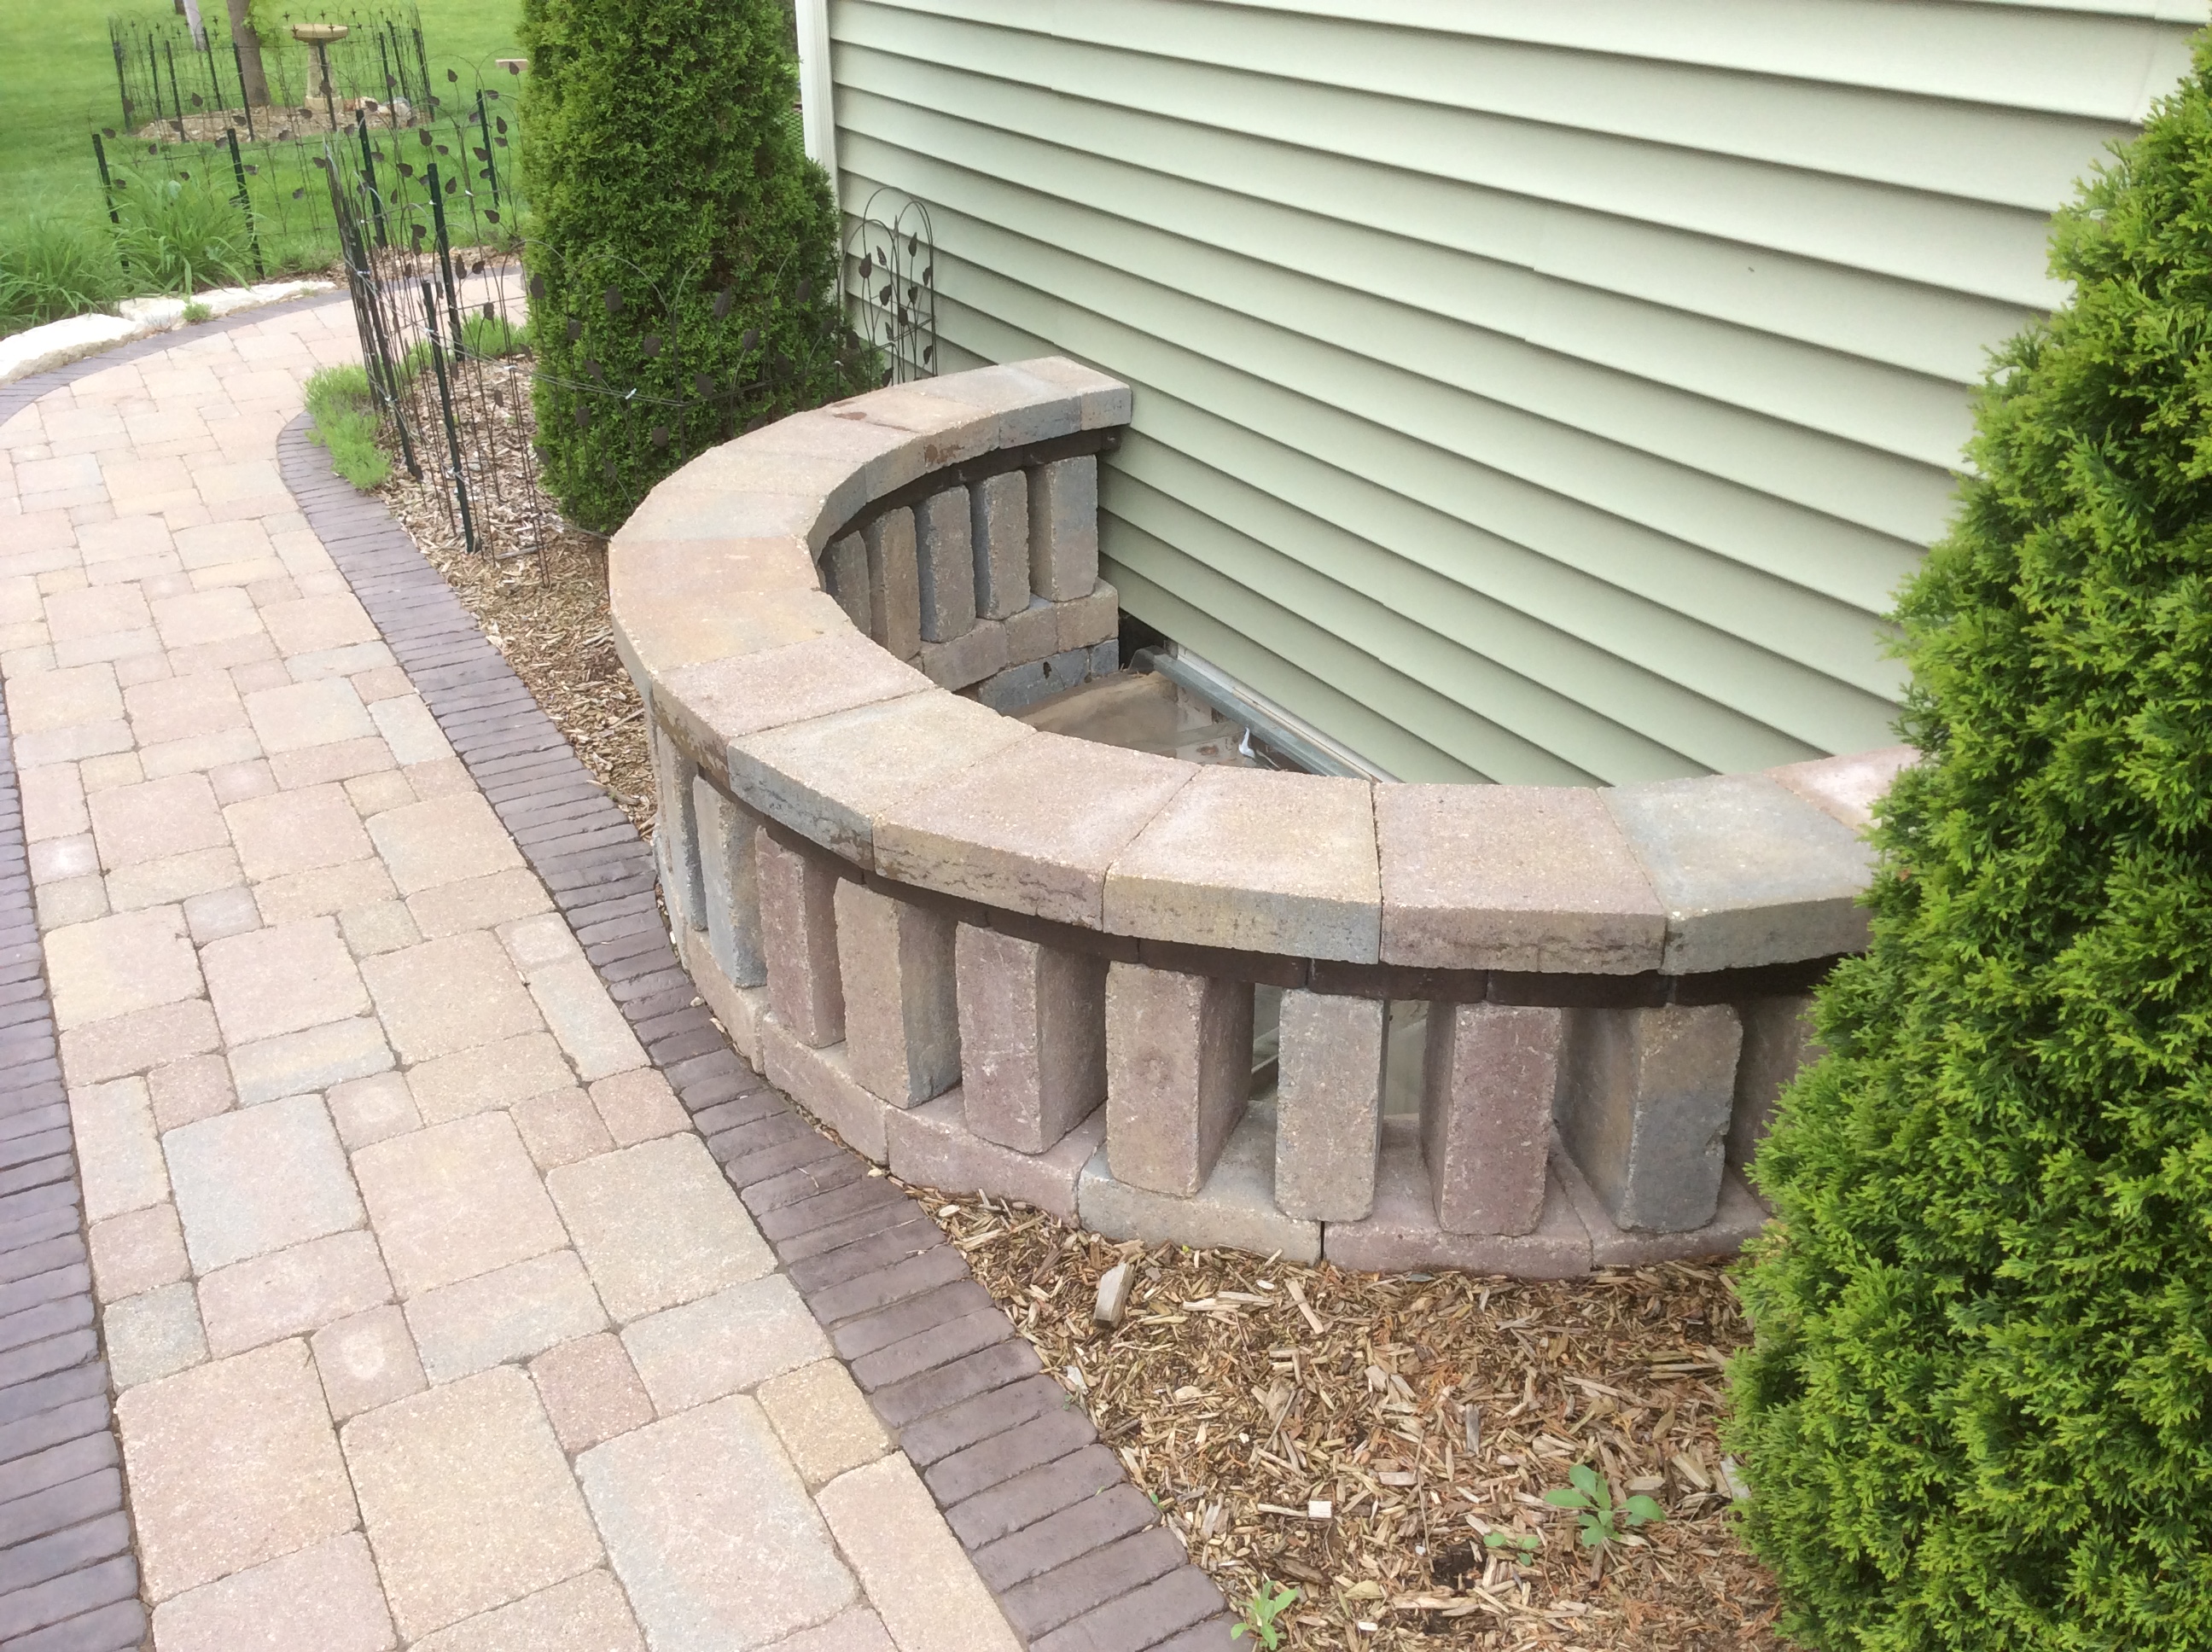 small decorative sit wall semi-circle next to house for landscaping